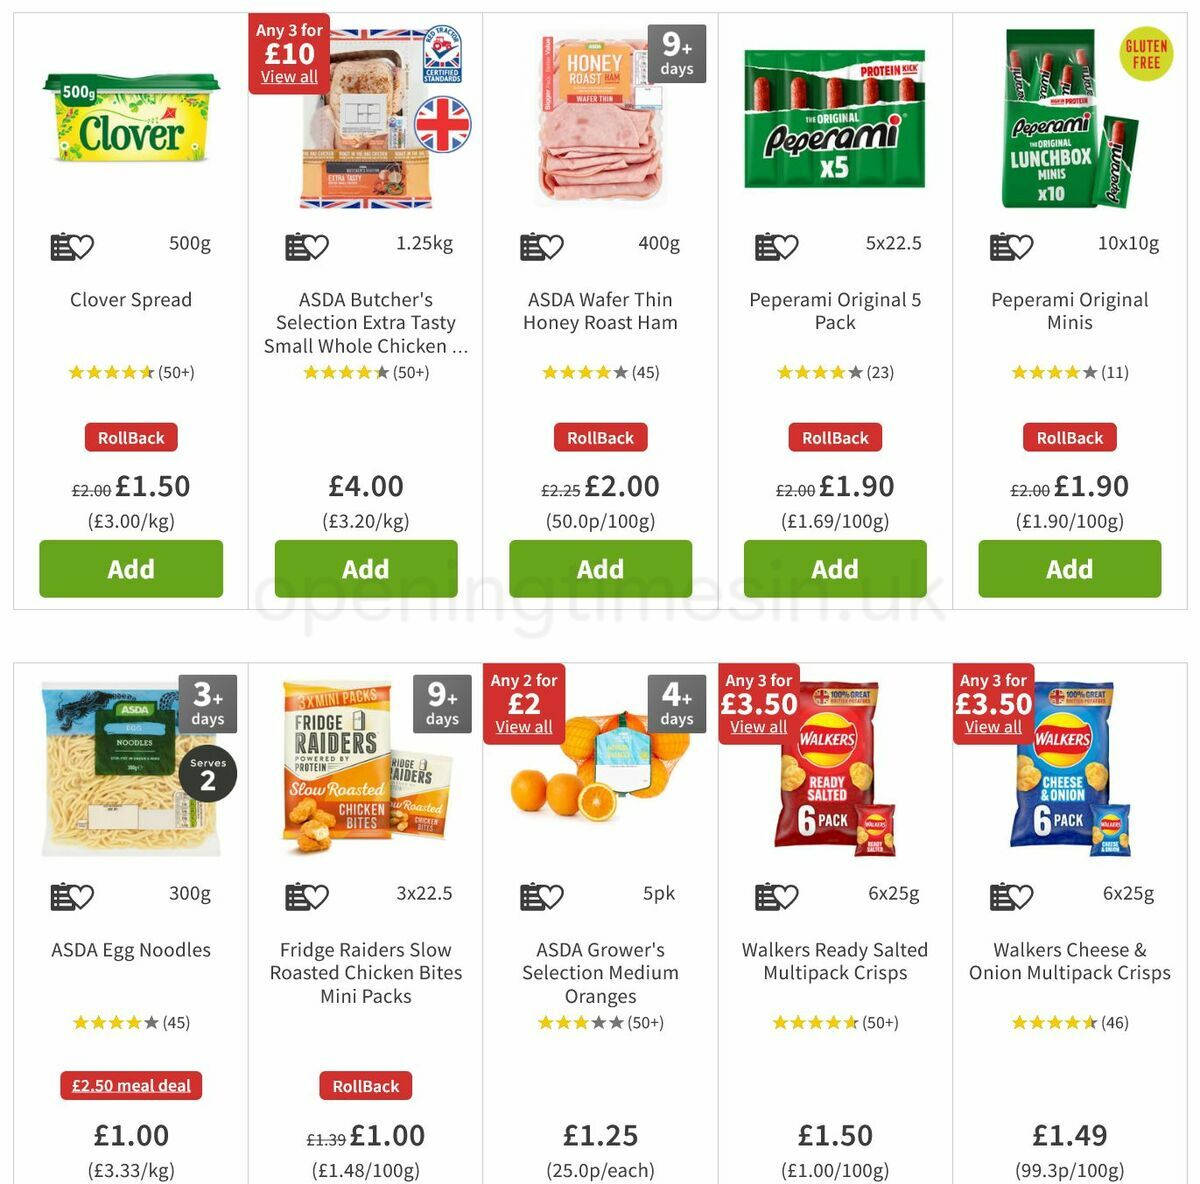 ASDA Offers from 10 February